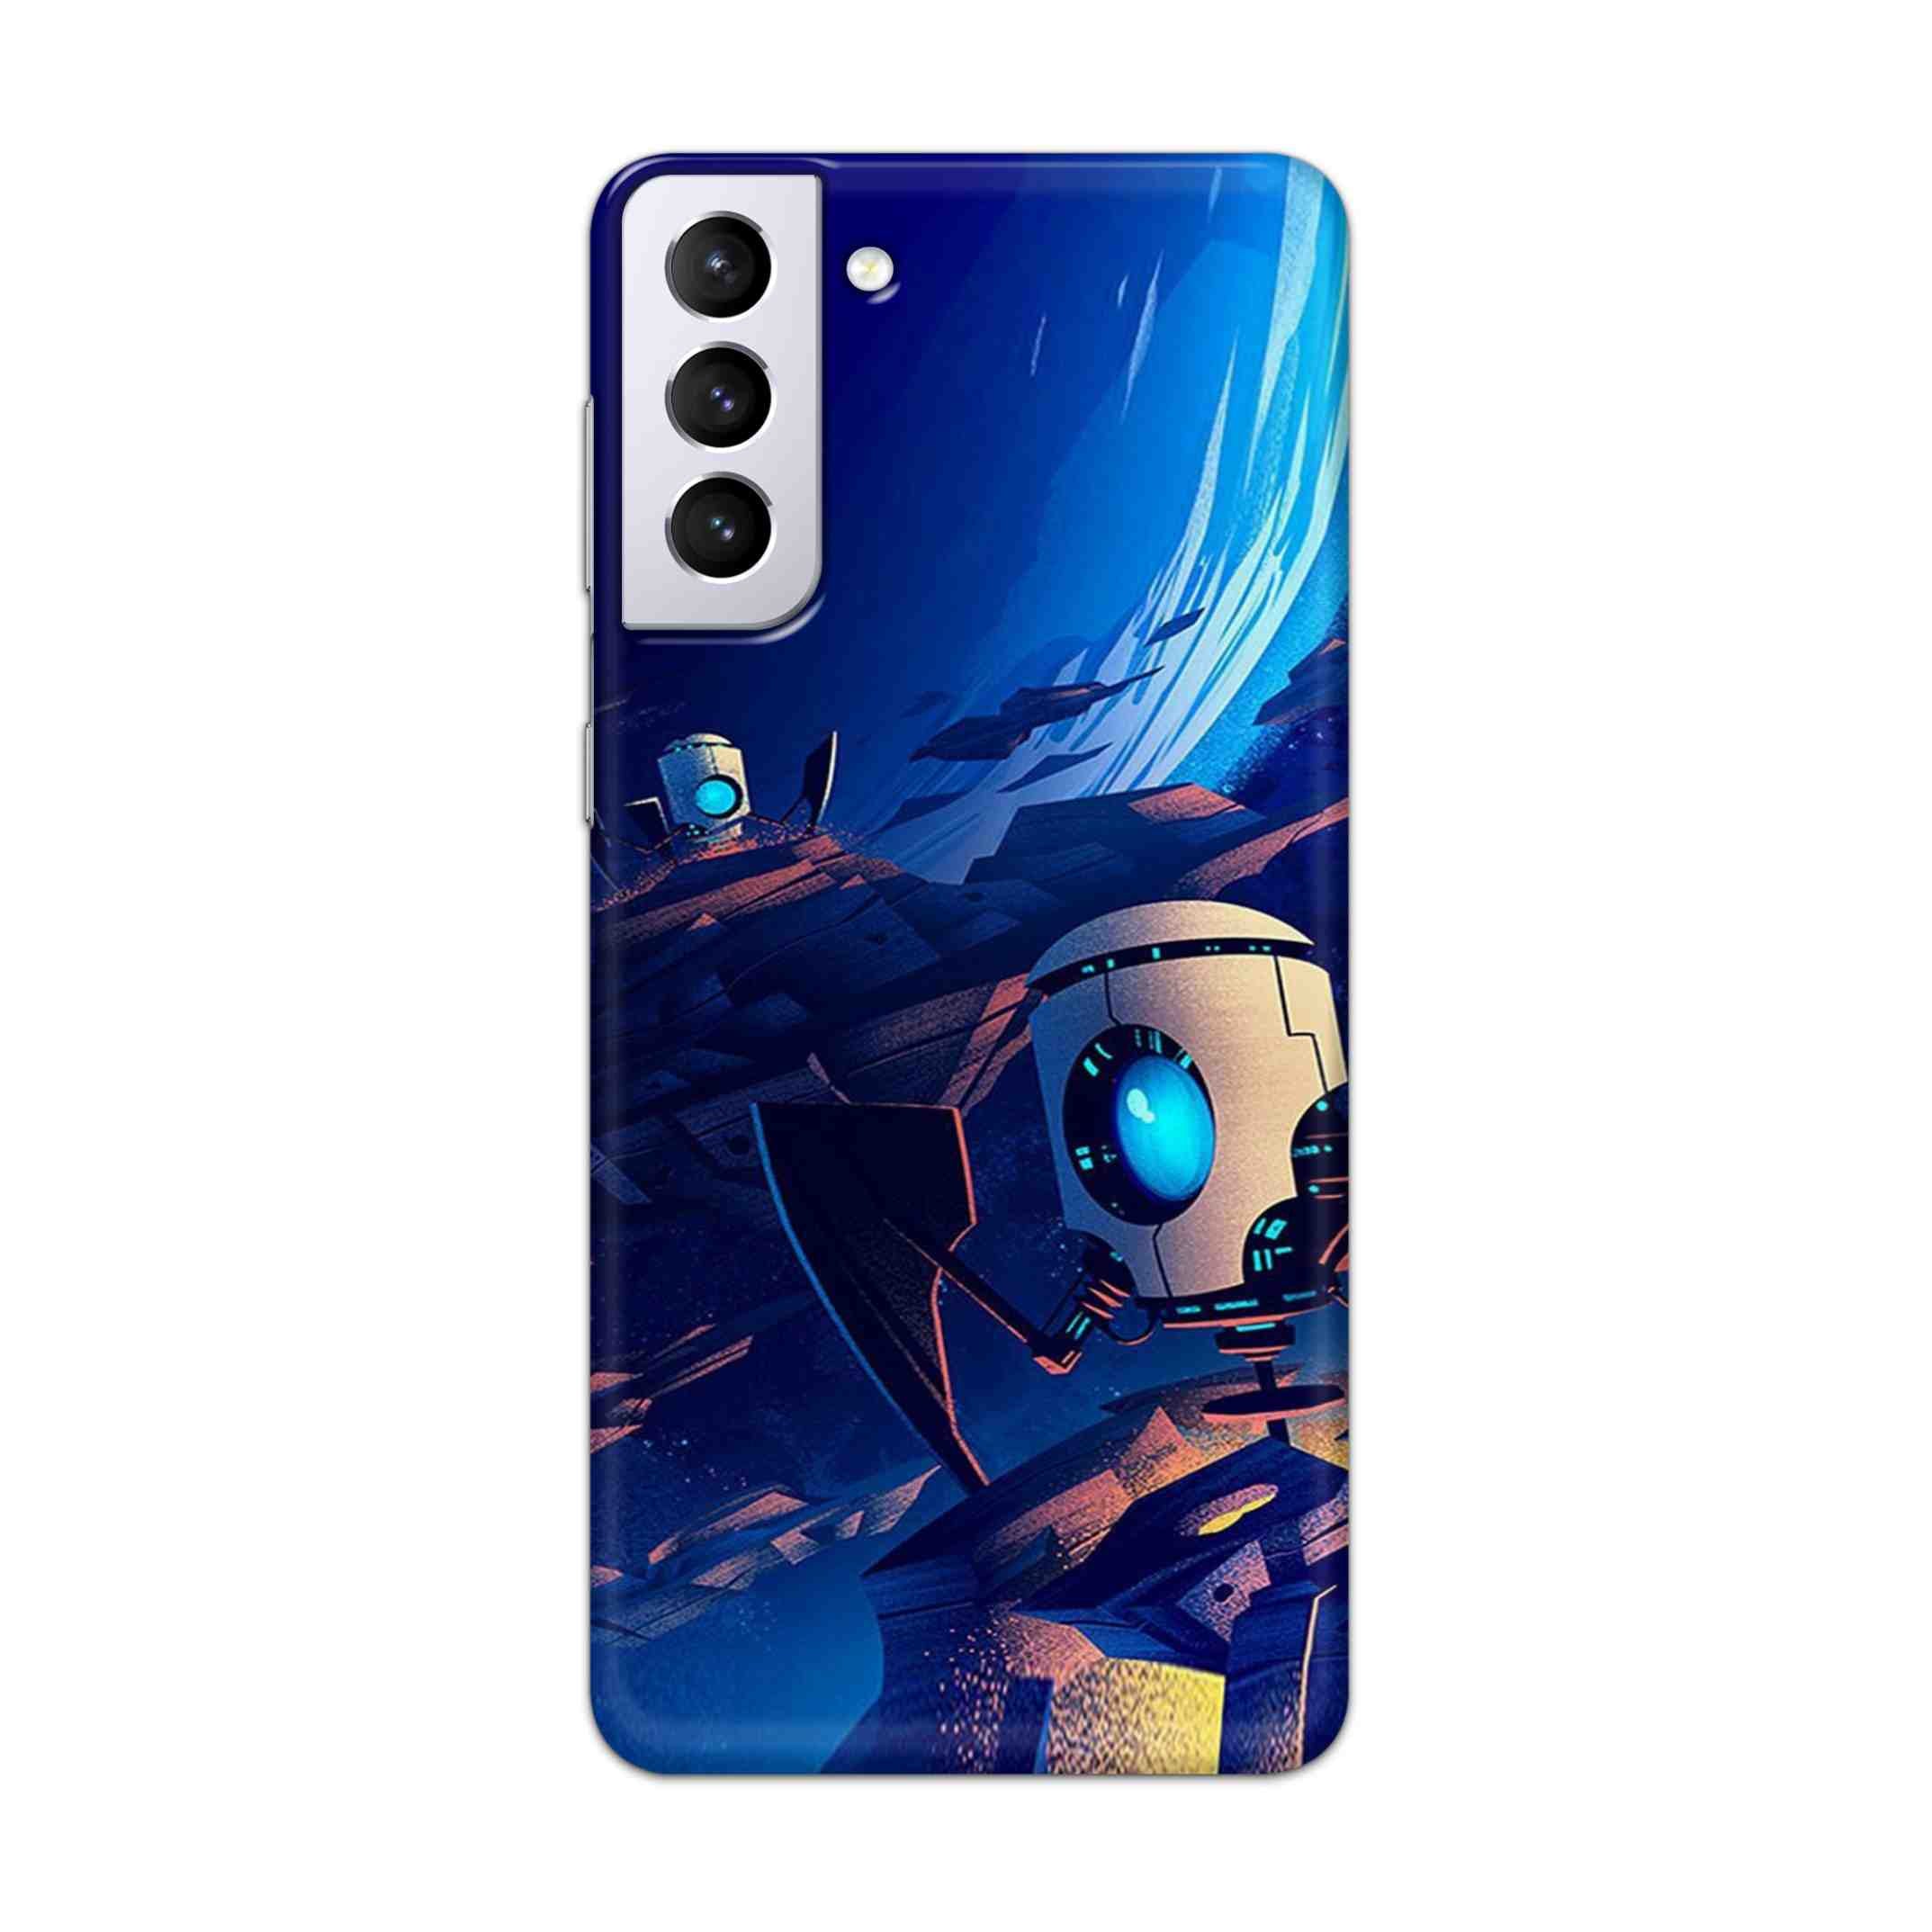 Buy Spaceship Robot Hard Back Mobile Phone Case Cover For Samsung Galaxy S21 Plus Online